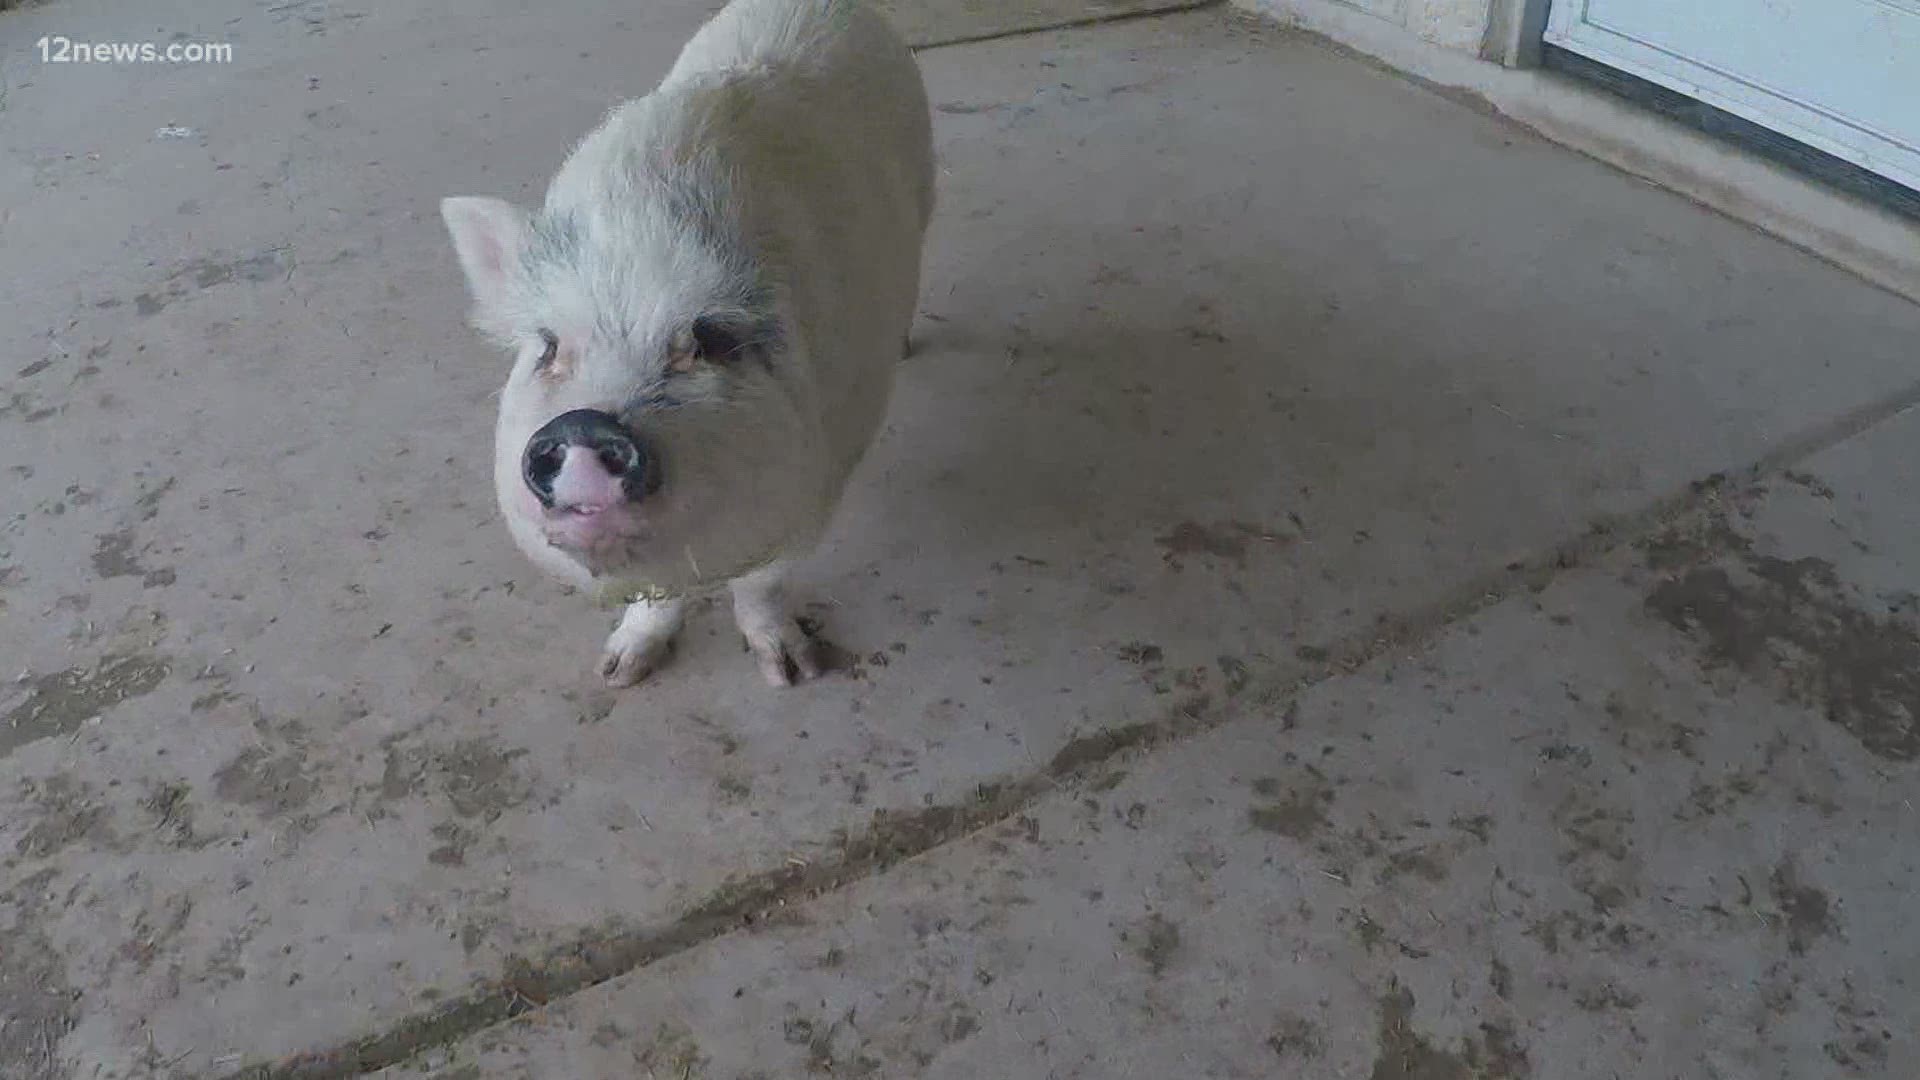 Better Piggies Rescue in Phoenix says the number of owners surrendering or abandoning their pigs is creating big problems. Team 12's Jen Wahl has the latest.